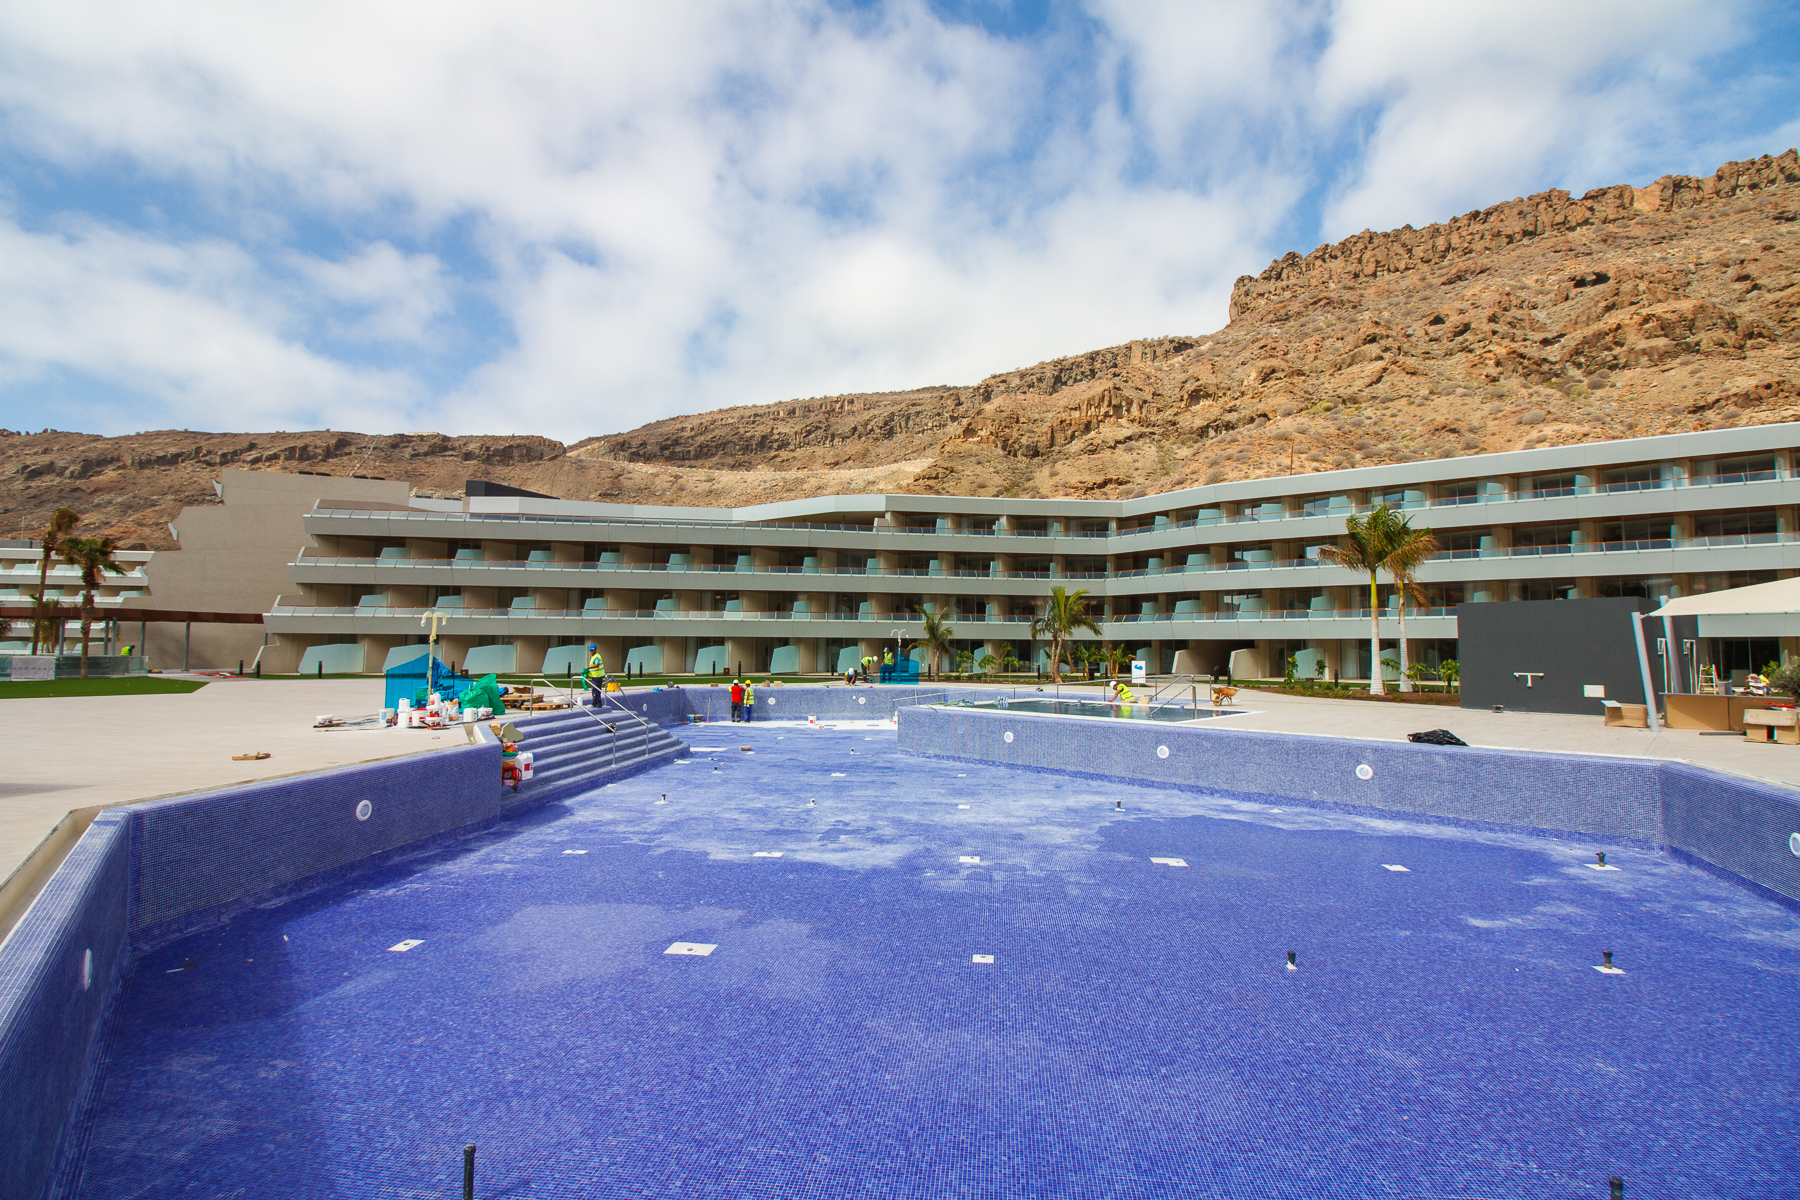 Poolside rooms at the new Radisson Blue hotel in Mogán